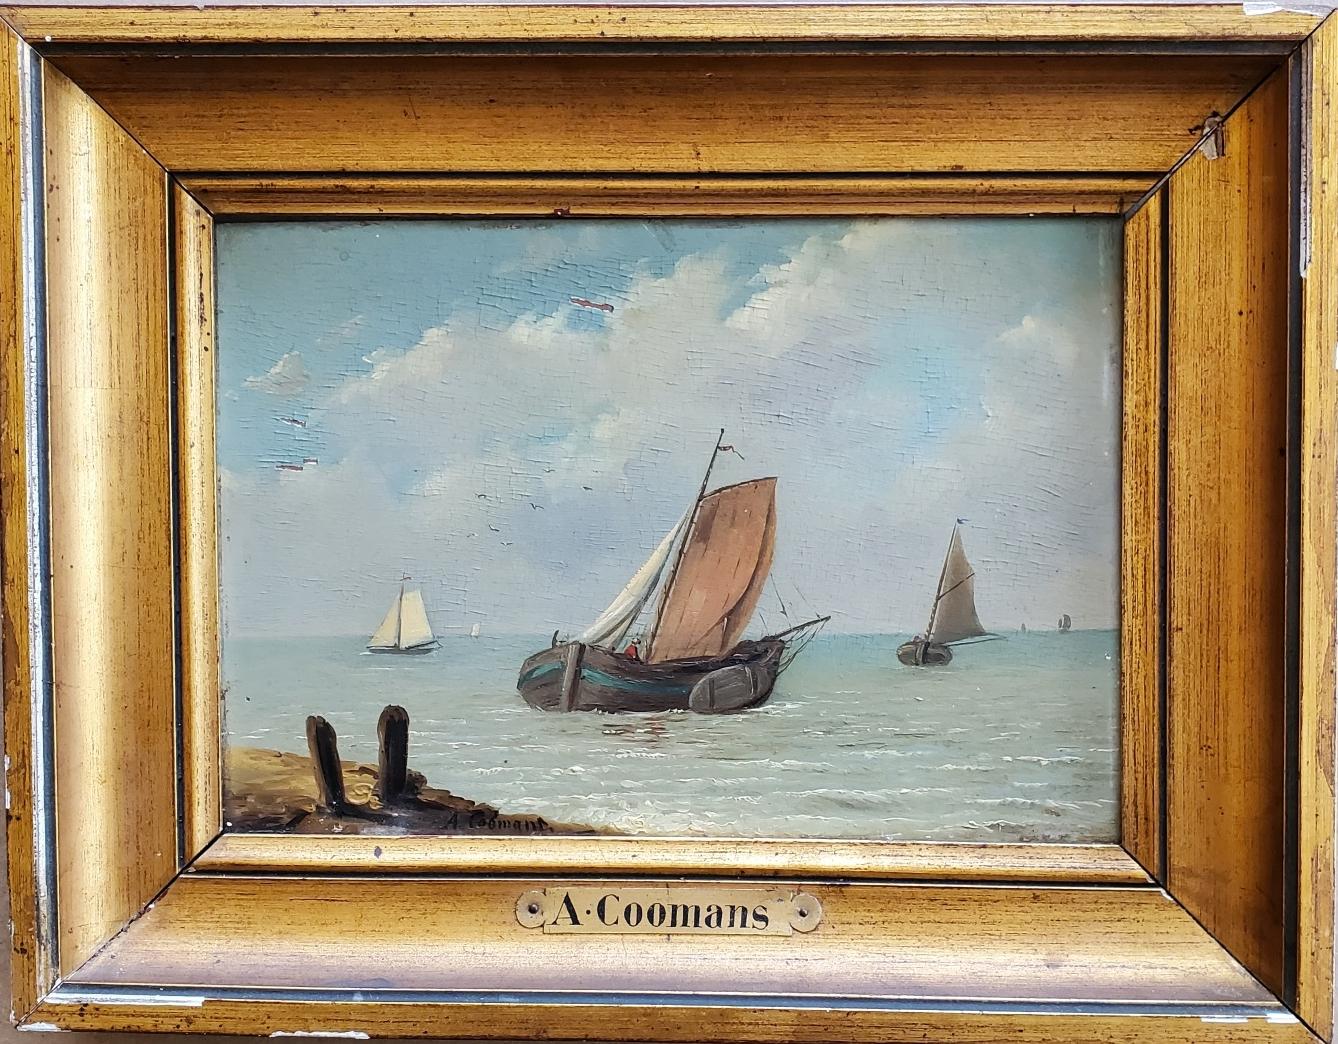 Pair of 19th Century Coastal Seascapes by Auguste Coomans (Belgian: act. 1855 - 1896), two oil on mahogany panel coastal seascapes featuring small craft sailing close to shore, with crew visible on deck, on calm seas under cloudy blue sky, one